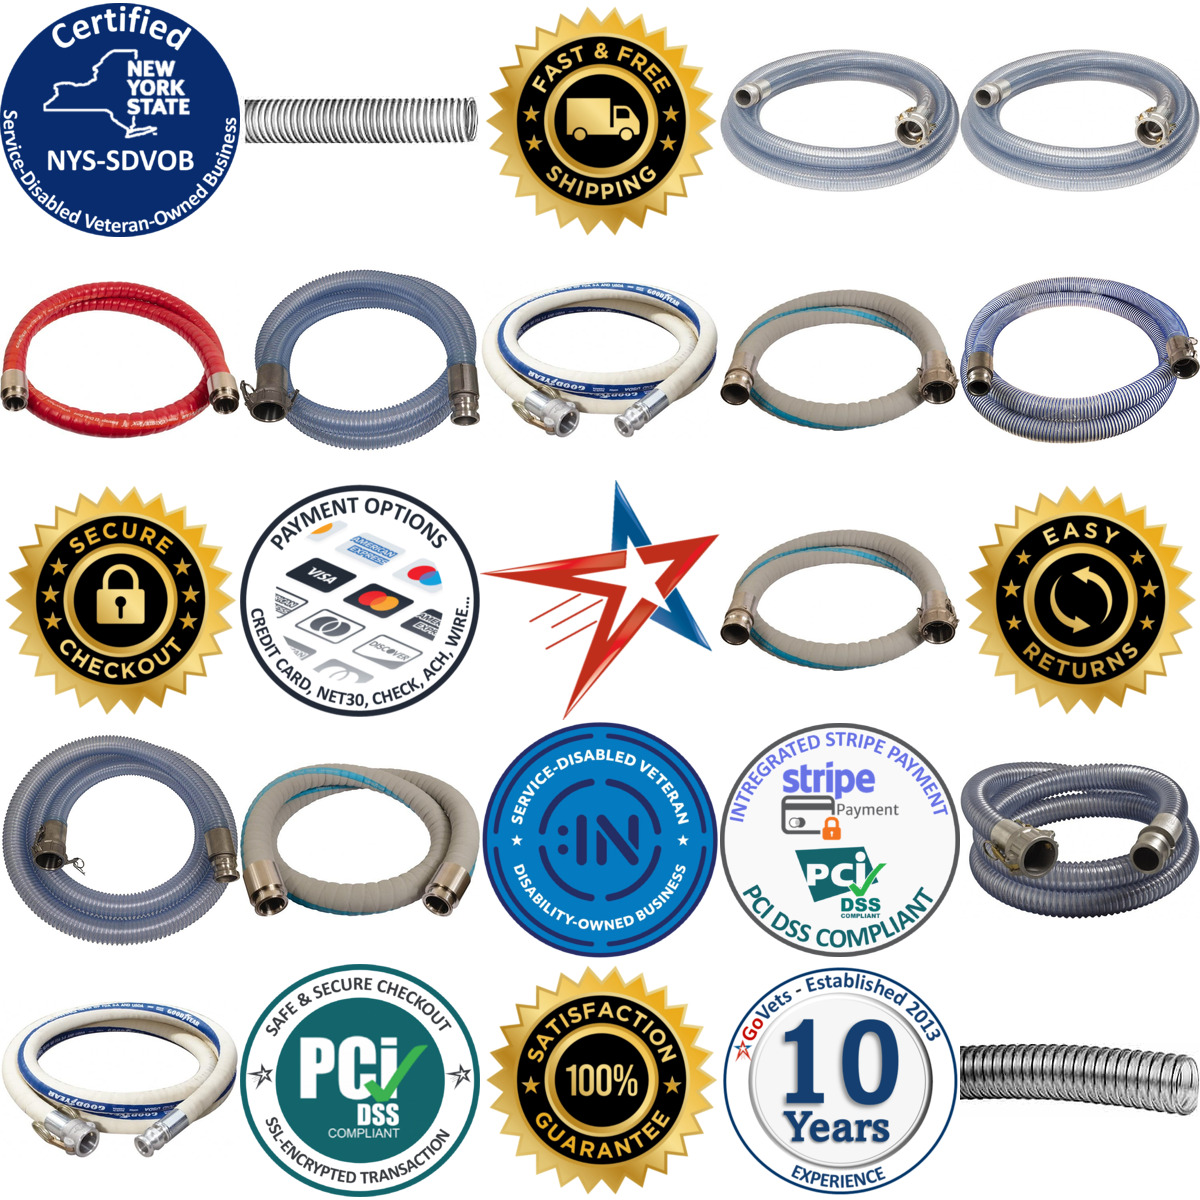 A selection of Food and Beverage Hose products on GoVets